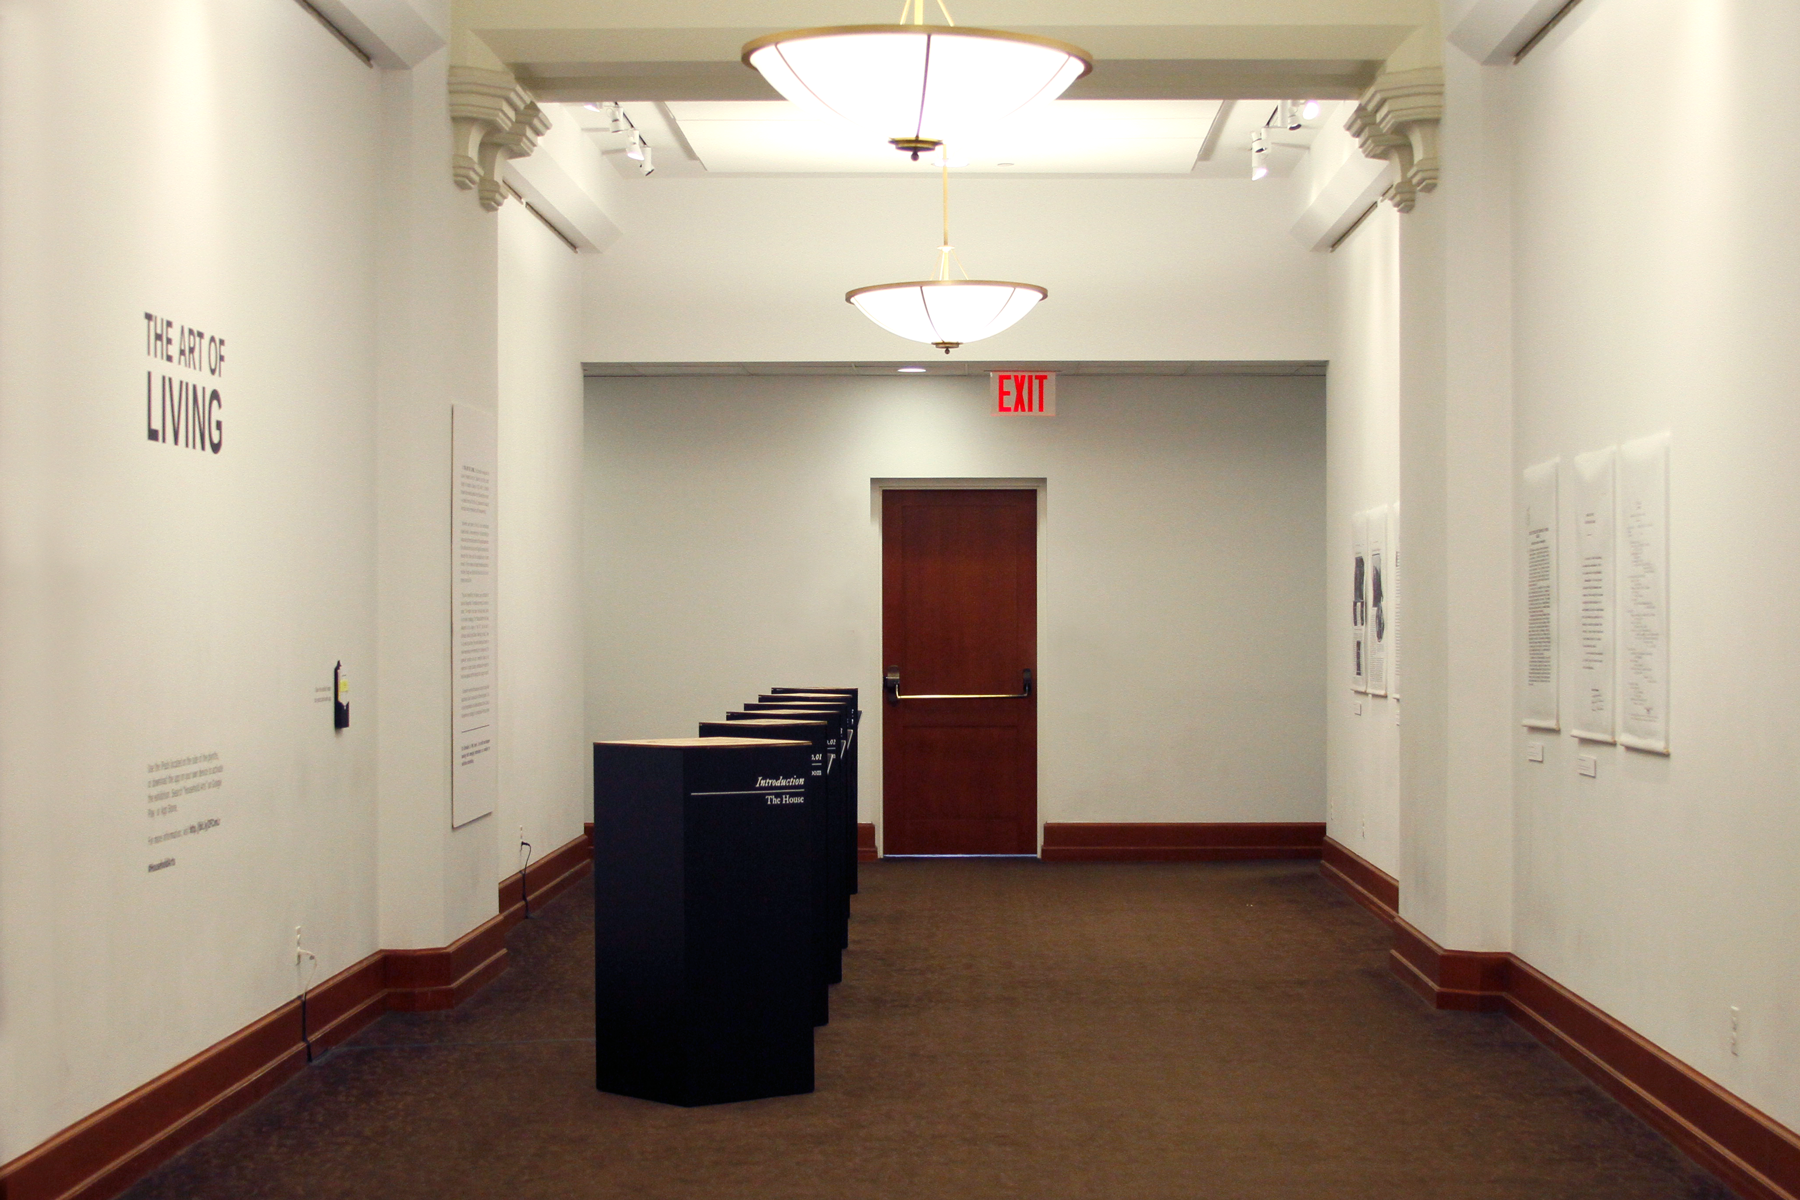 Photo of a hallway with the exhibition. On the left wall, the title and text about the exhibition. On the center-left of the hall there are six plinths lined up until the end of the walls. And on the right wall there are posters.